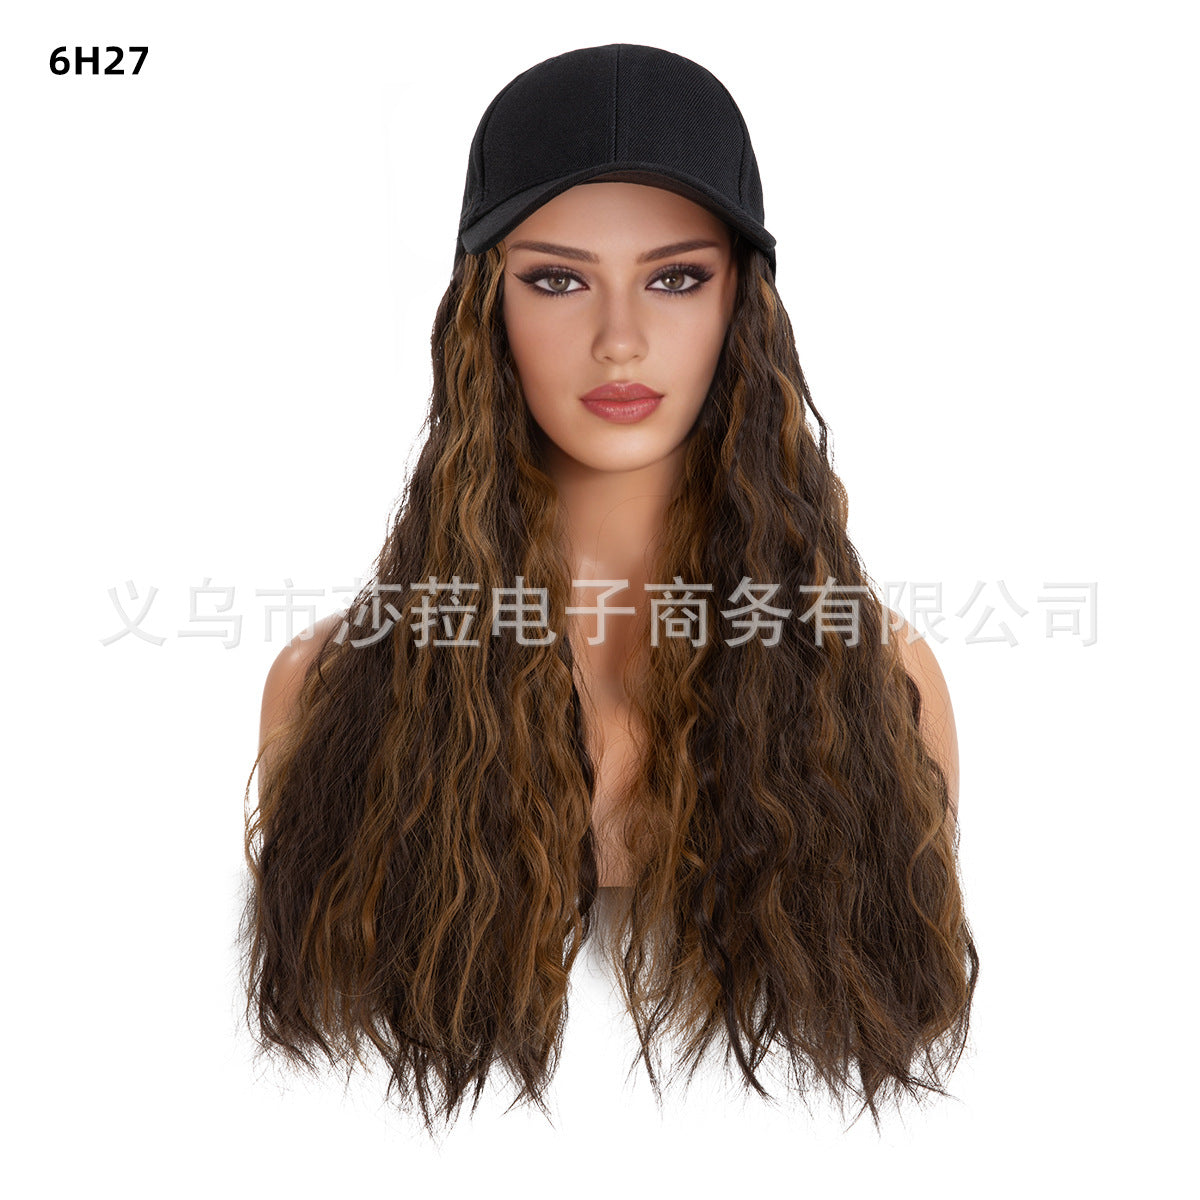 Women&#39;s Corn Wave Curly Hair Wig with Black Baseball Cap, Mid-Length Voluminous Synthetic Hair Hat Wig Combo